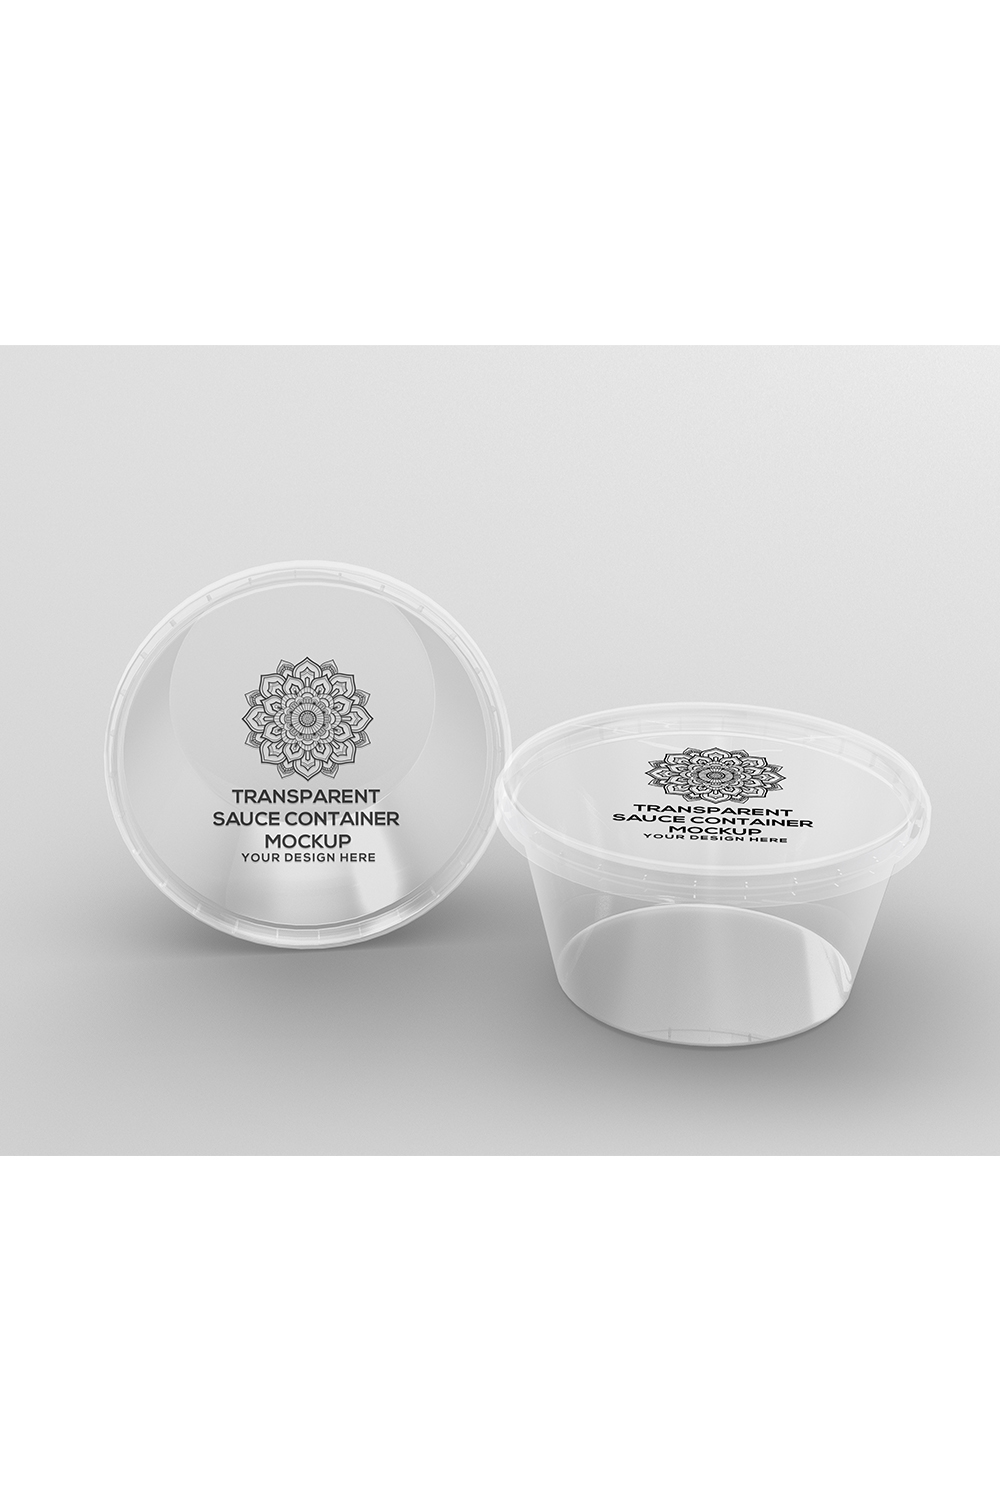 Transparent Round Sauce Containers Packaging Mockup - MasterBundles